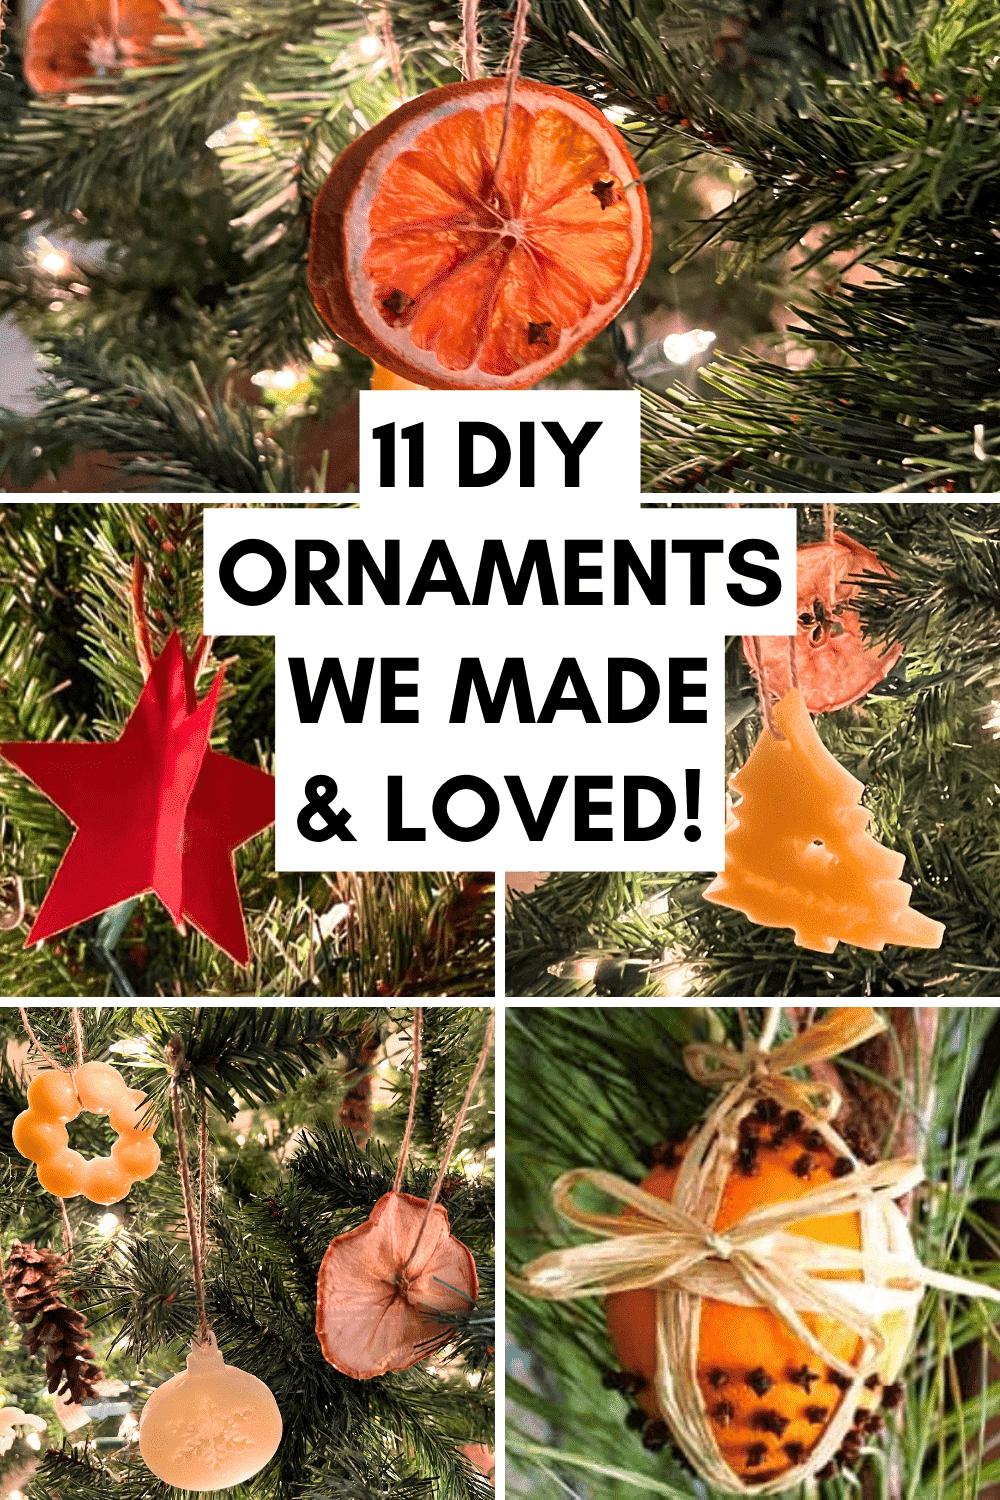 Easy Homemade Ornaments Ideas For Kids (DIY Christmas Tree Decorations To Make With Family)